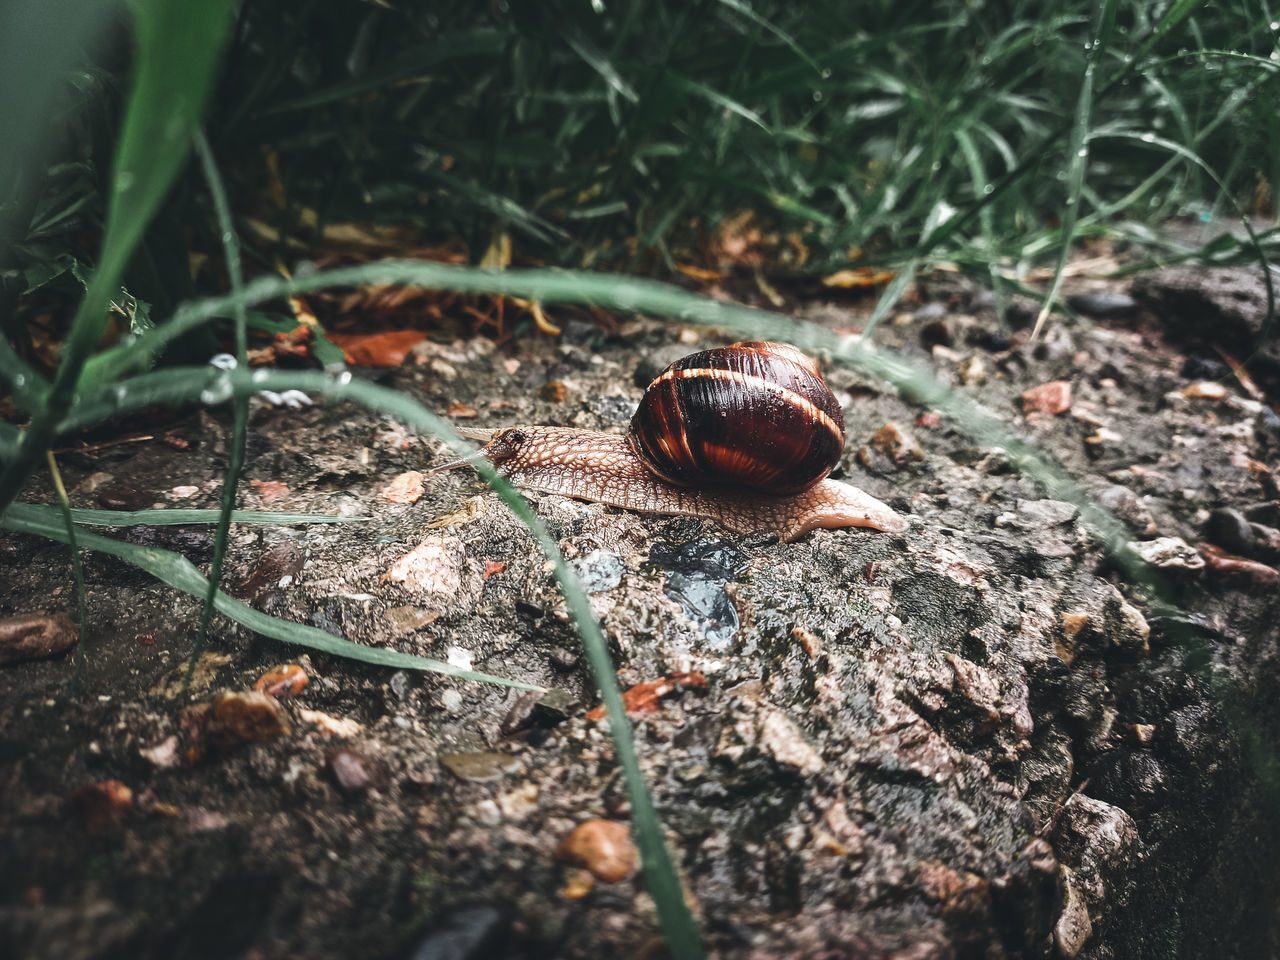 CLOSE-UP OF SNAIL ON FIELD